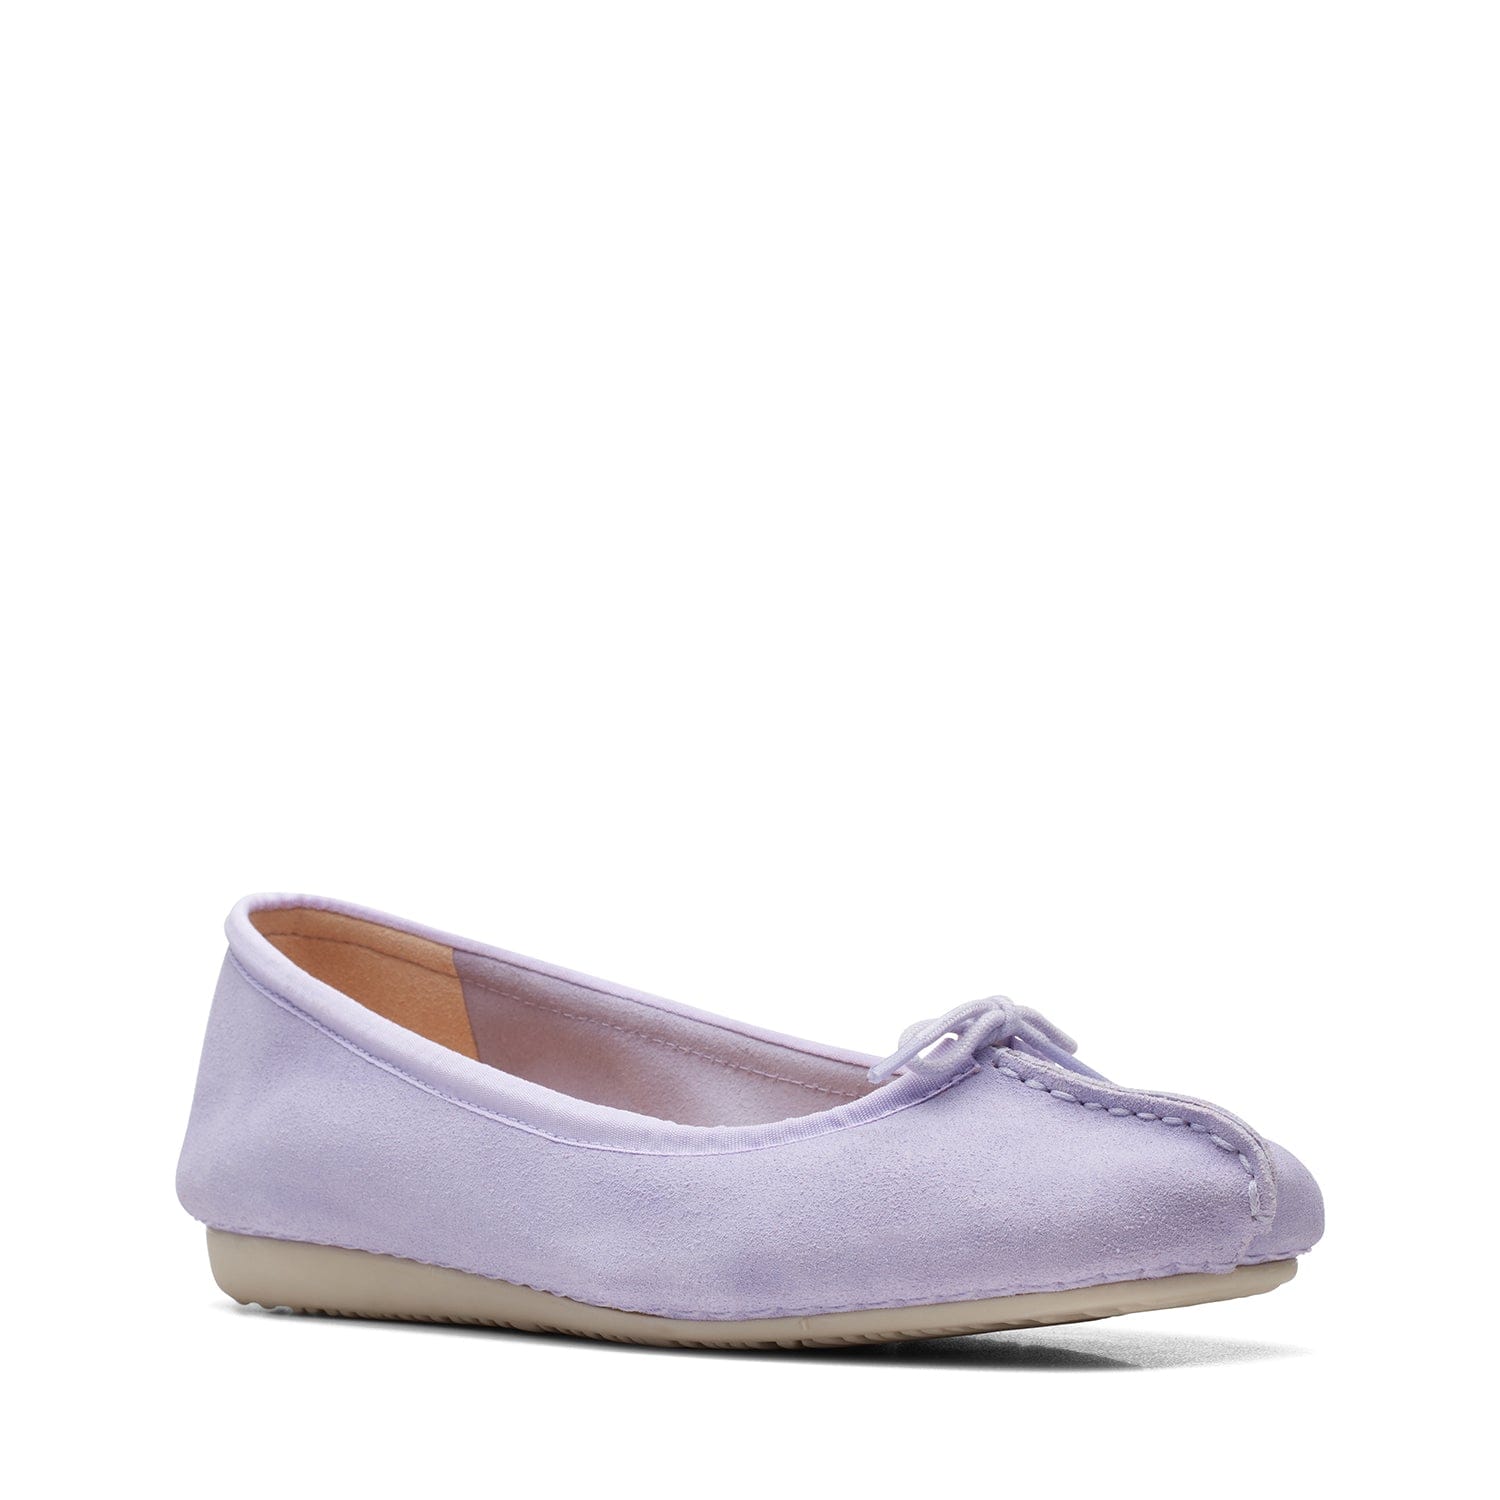 Clarks Freckle Ice - Shoes - Lilac Suede - 261709614 - D Width (Standard Fit)